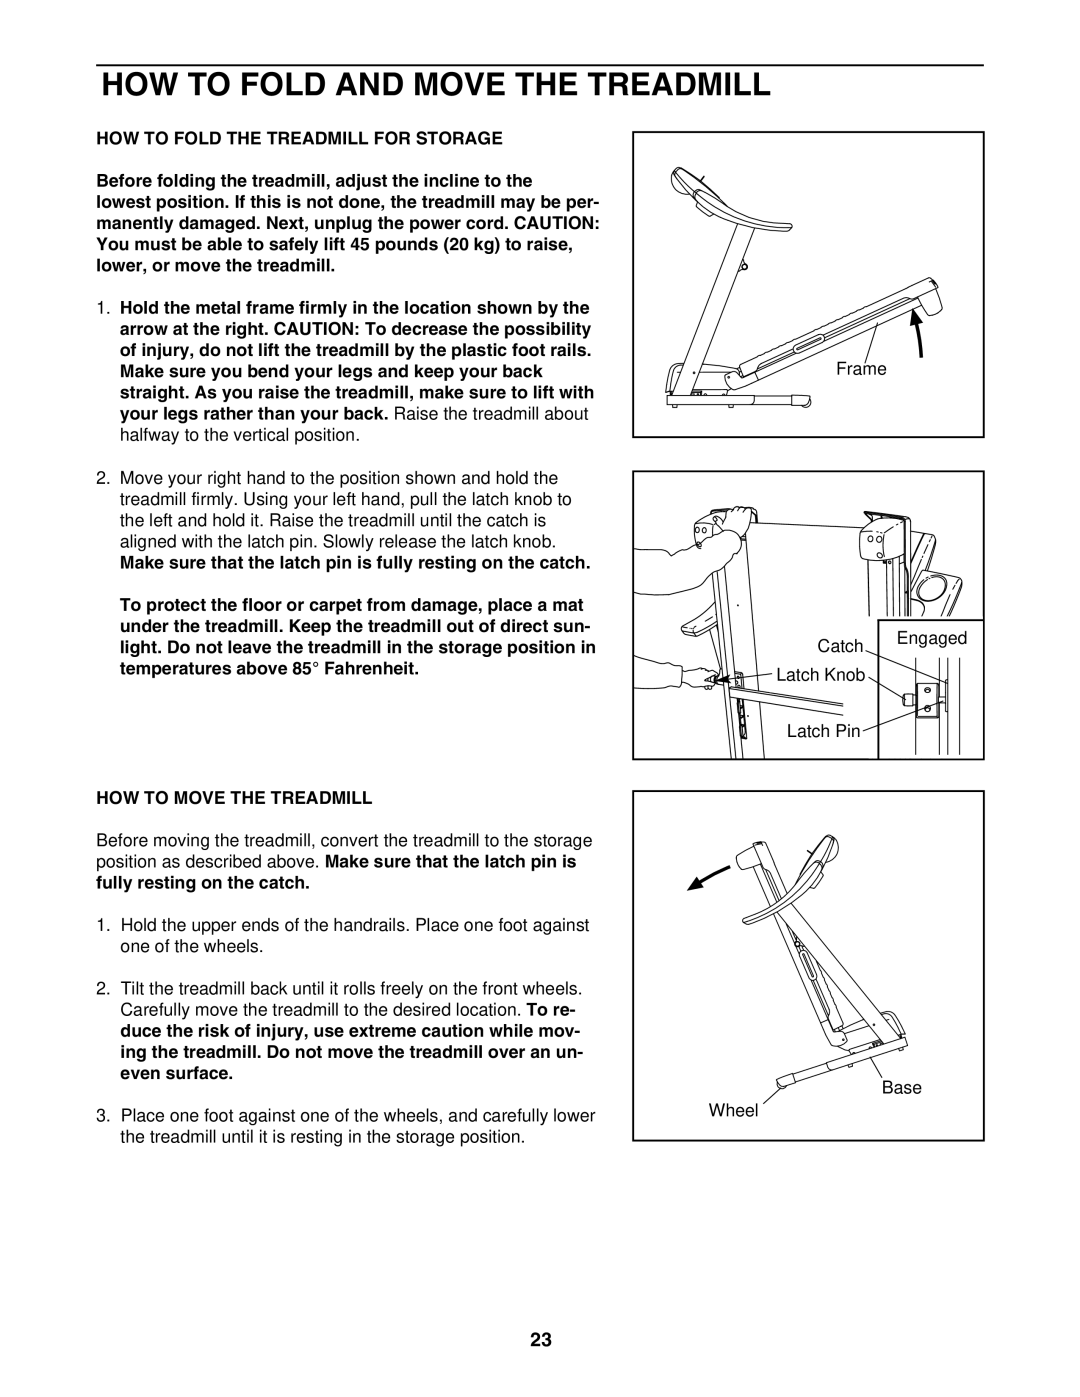 Reebok Fitness RBTL09906.0 manual HOW to Fold and Move the Treadmill, HOW to Fold the Treadmill for Storage 